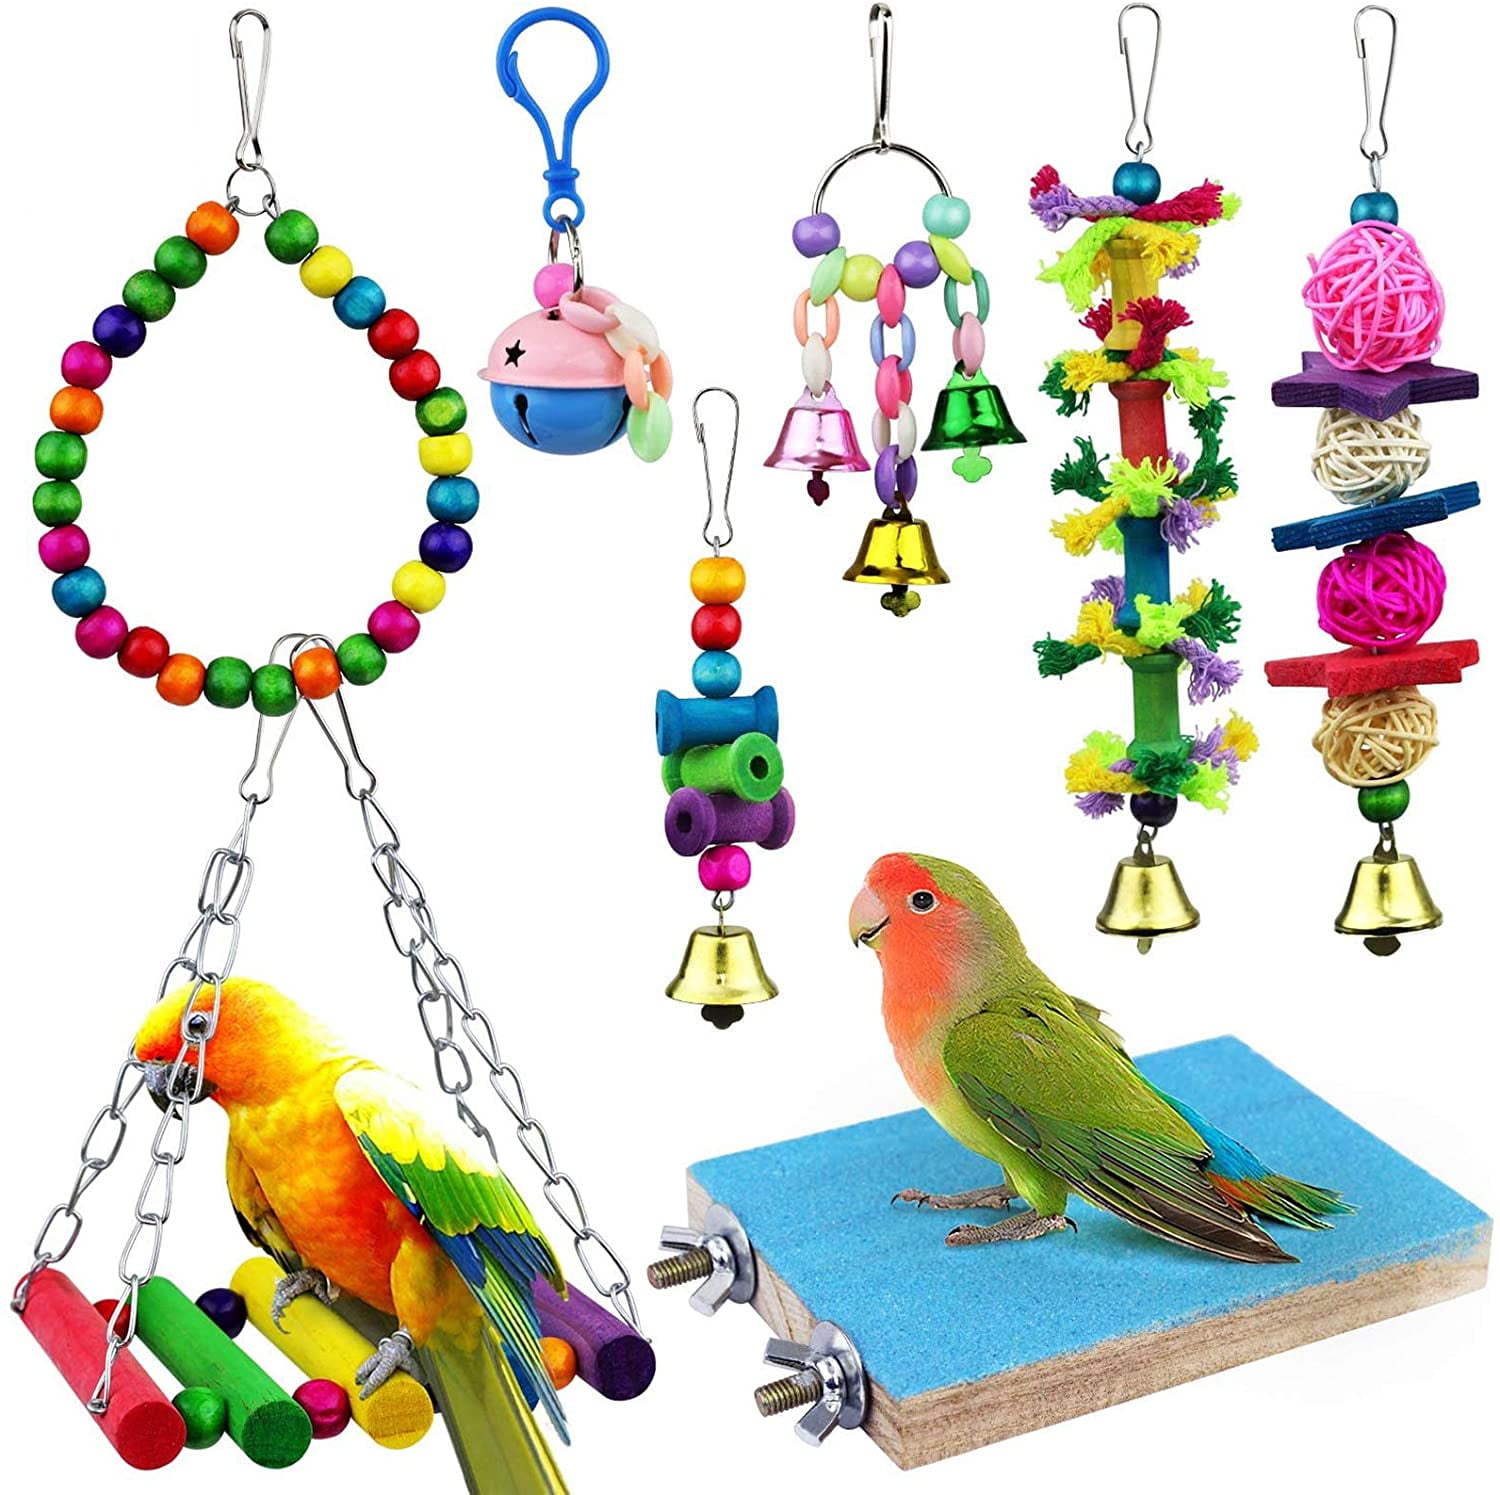 Bird Perch Cage Accessories Hanging Swing Hammock Chewing Toys for Parakeets Cockatiels Colorful VavoPaw Bird Parrot Toys Conures Finches Macaws Love Birds 10 Colored Paper Rattan Balls Toys 